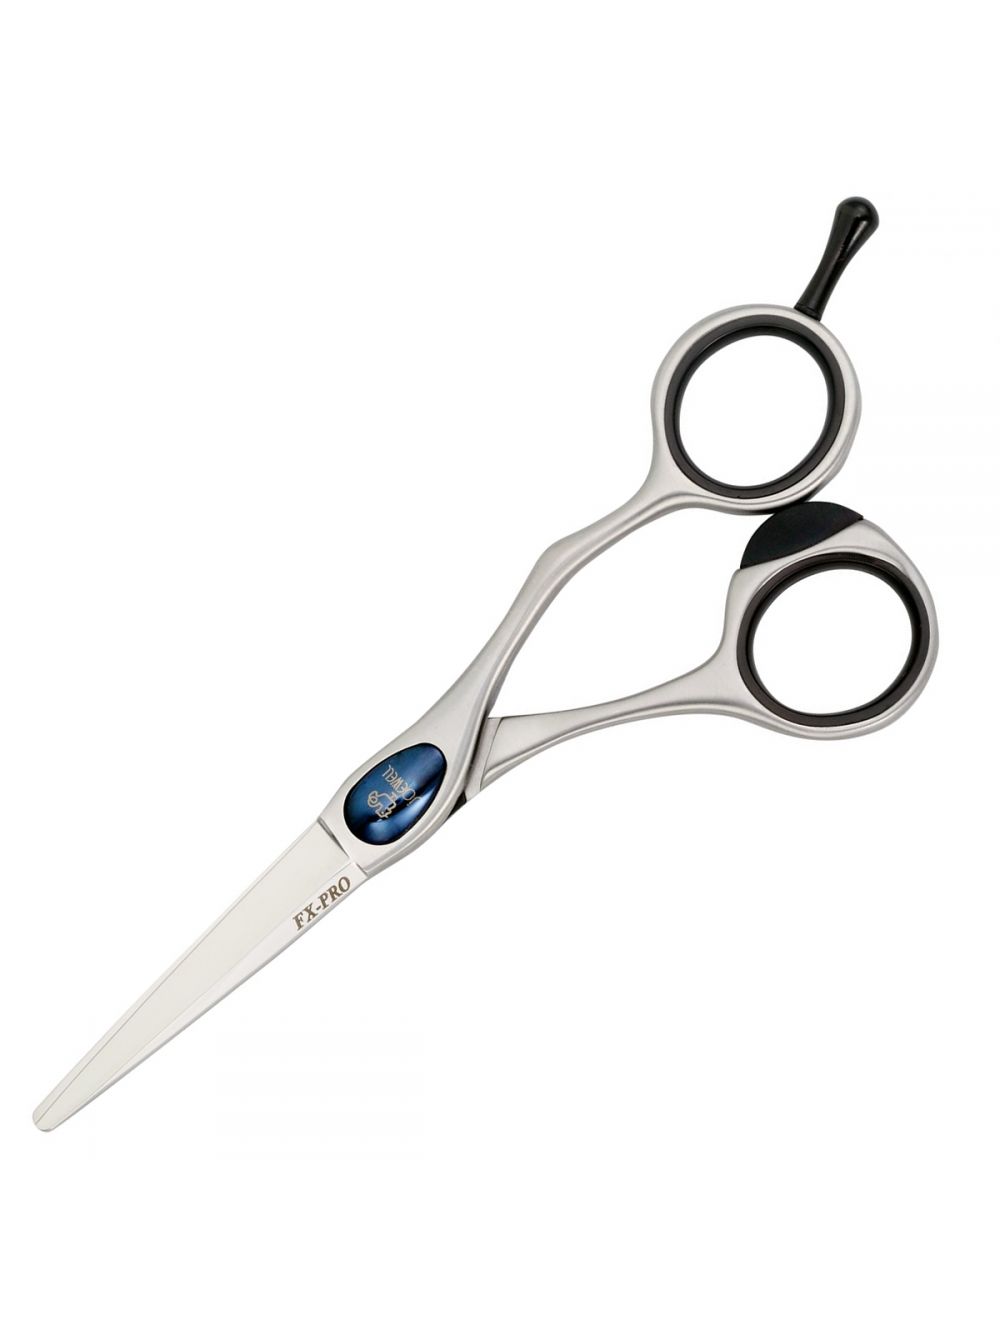 Joewell FX Pro Hairdressing Scissors - Ultimate Hair and Beauty